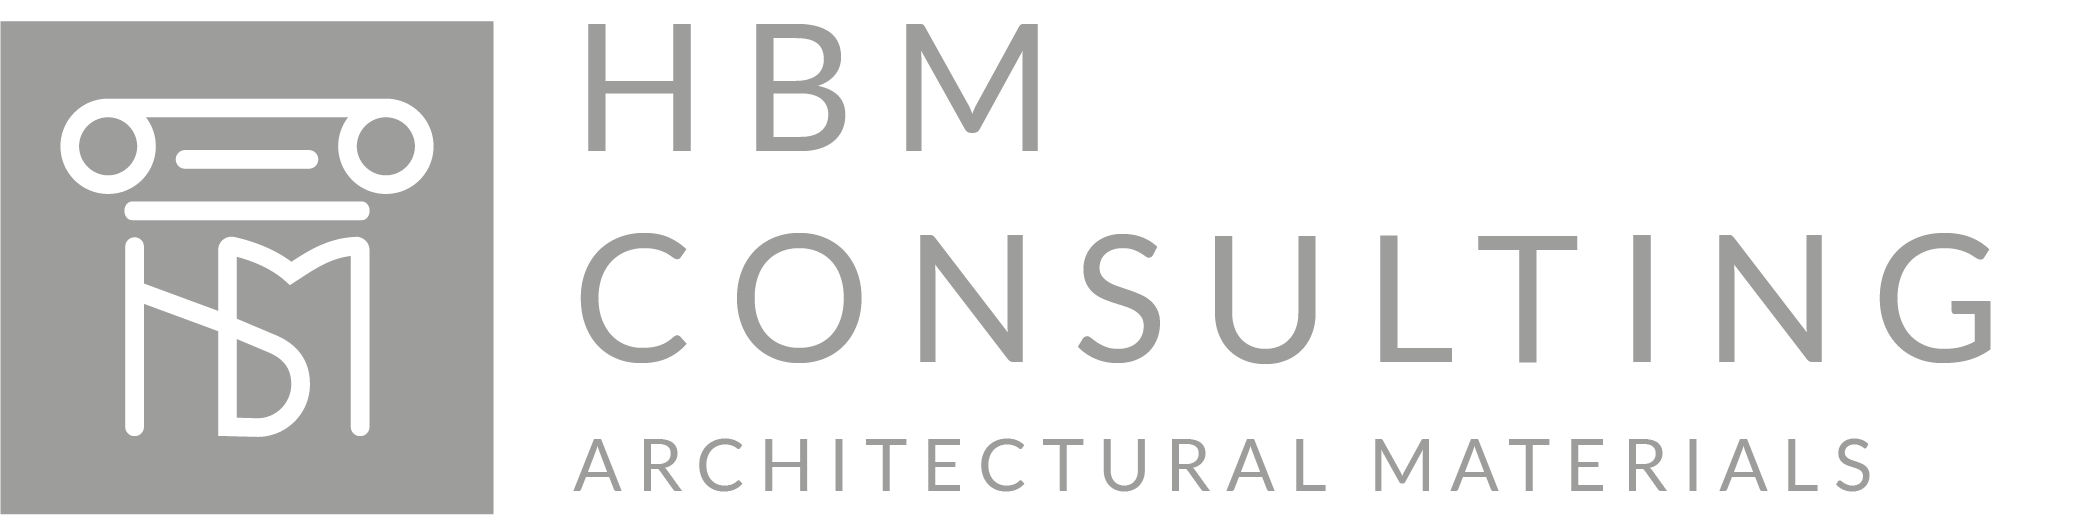 HBM Consulting – Architectural Materials